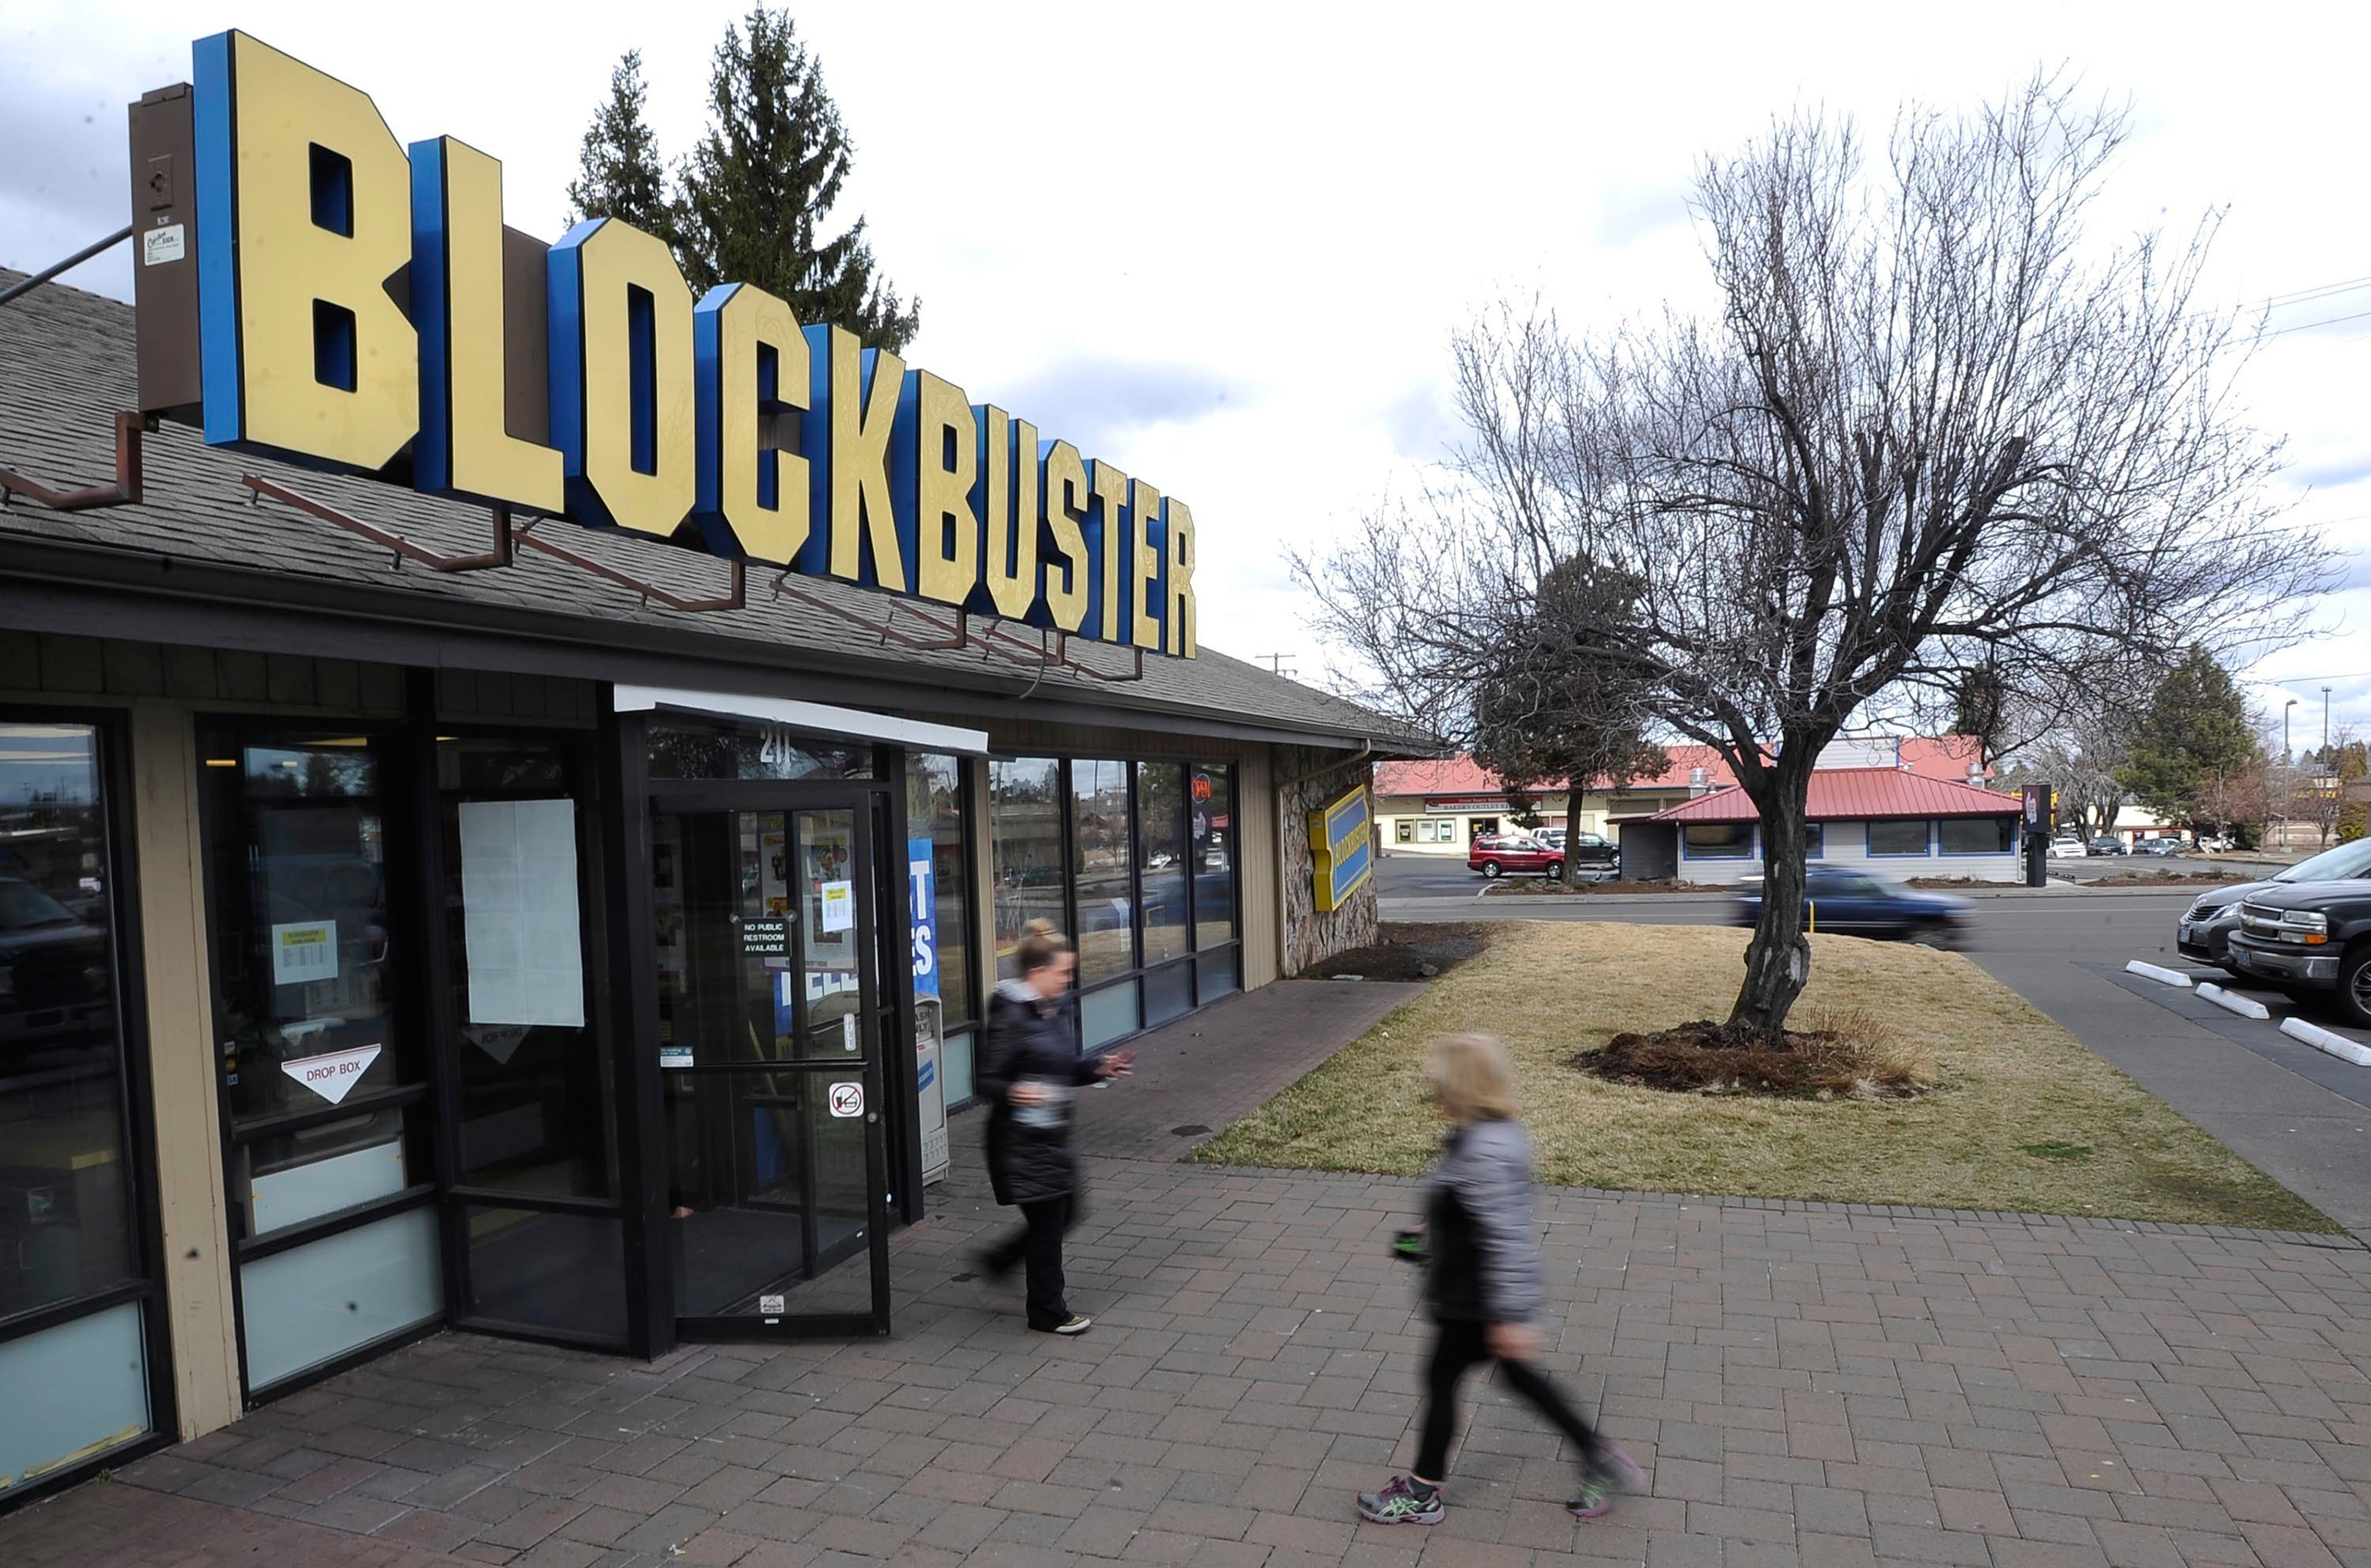 This Is the Last Blockbuster in the U.S. Meet the People Keeping the Rental Store Alive